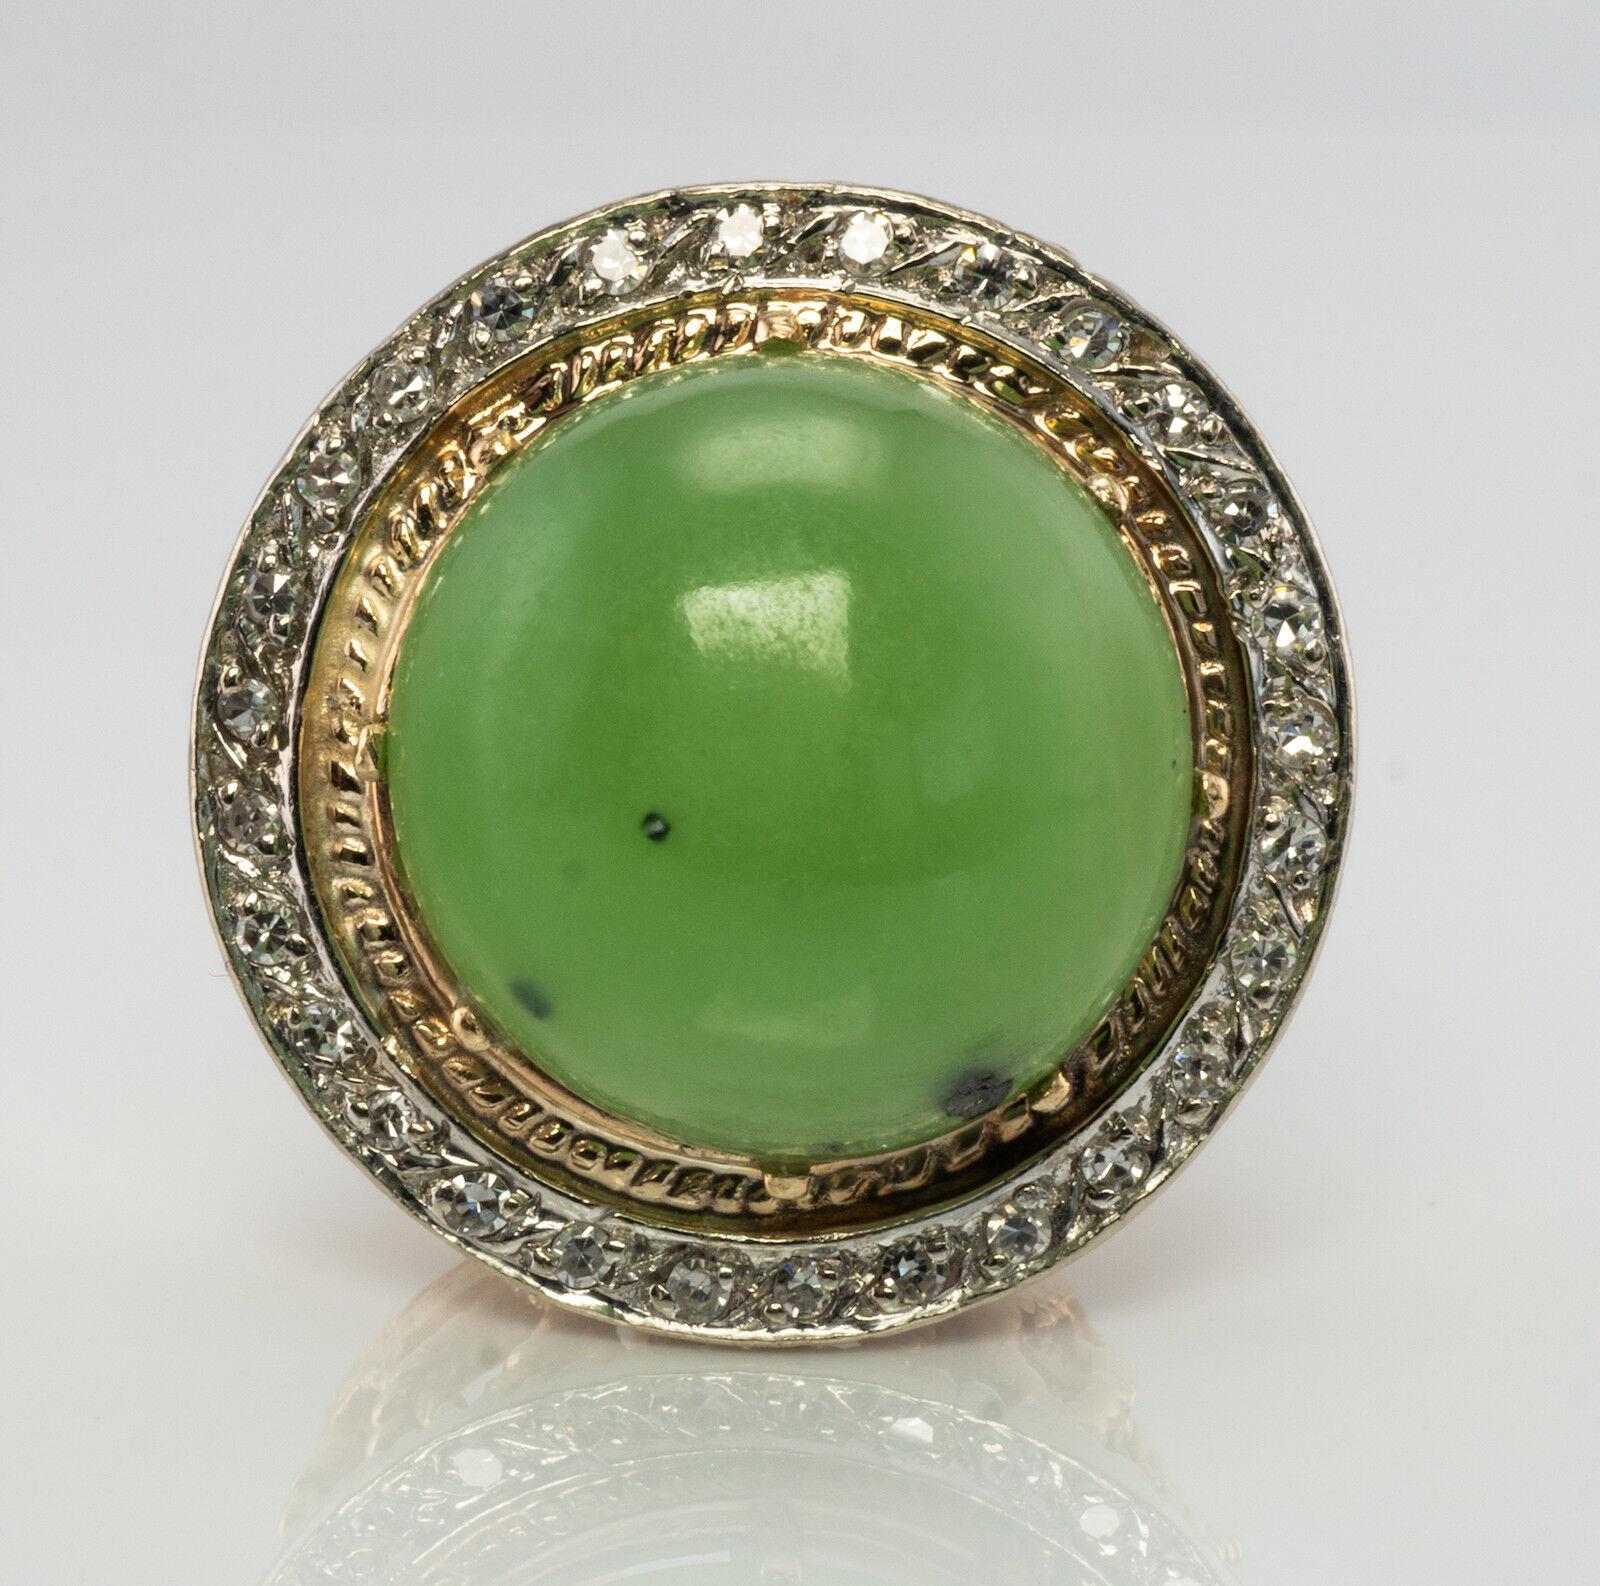 This terrific vintage ring is finely crafted in solid 14K Yellow gold (carefully tested and guaranteed) and set with Natural Jade and single cut Diamonds. There are 28 single cut diamonds set in white gold. These gems are estimated to be very clean